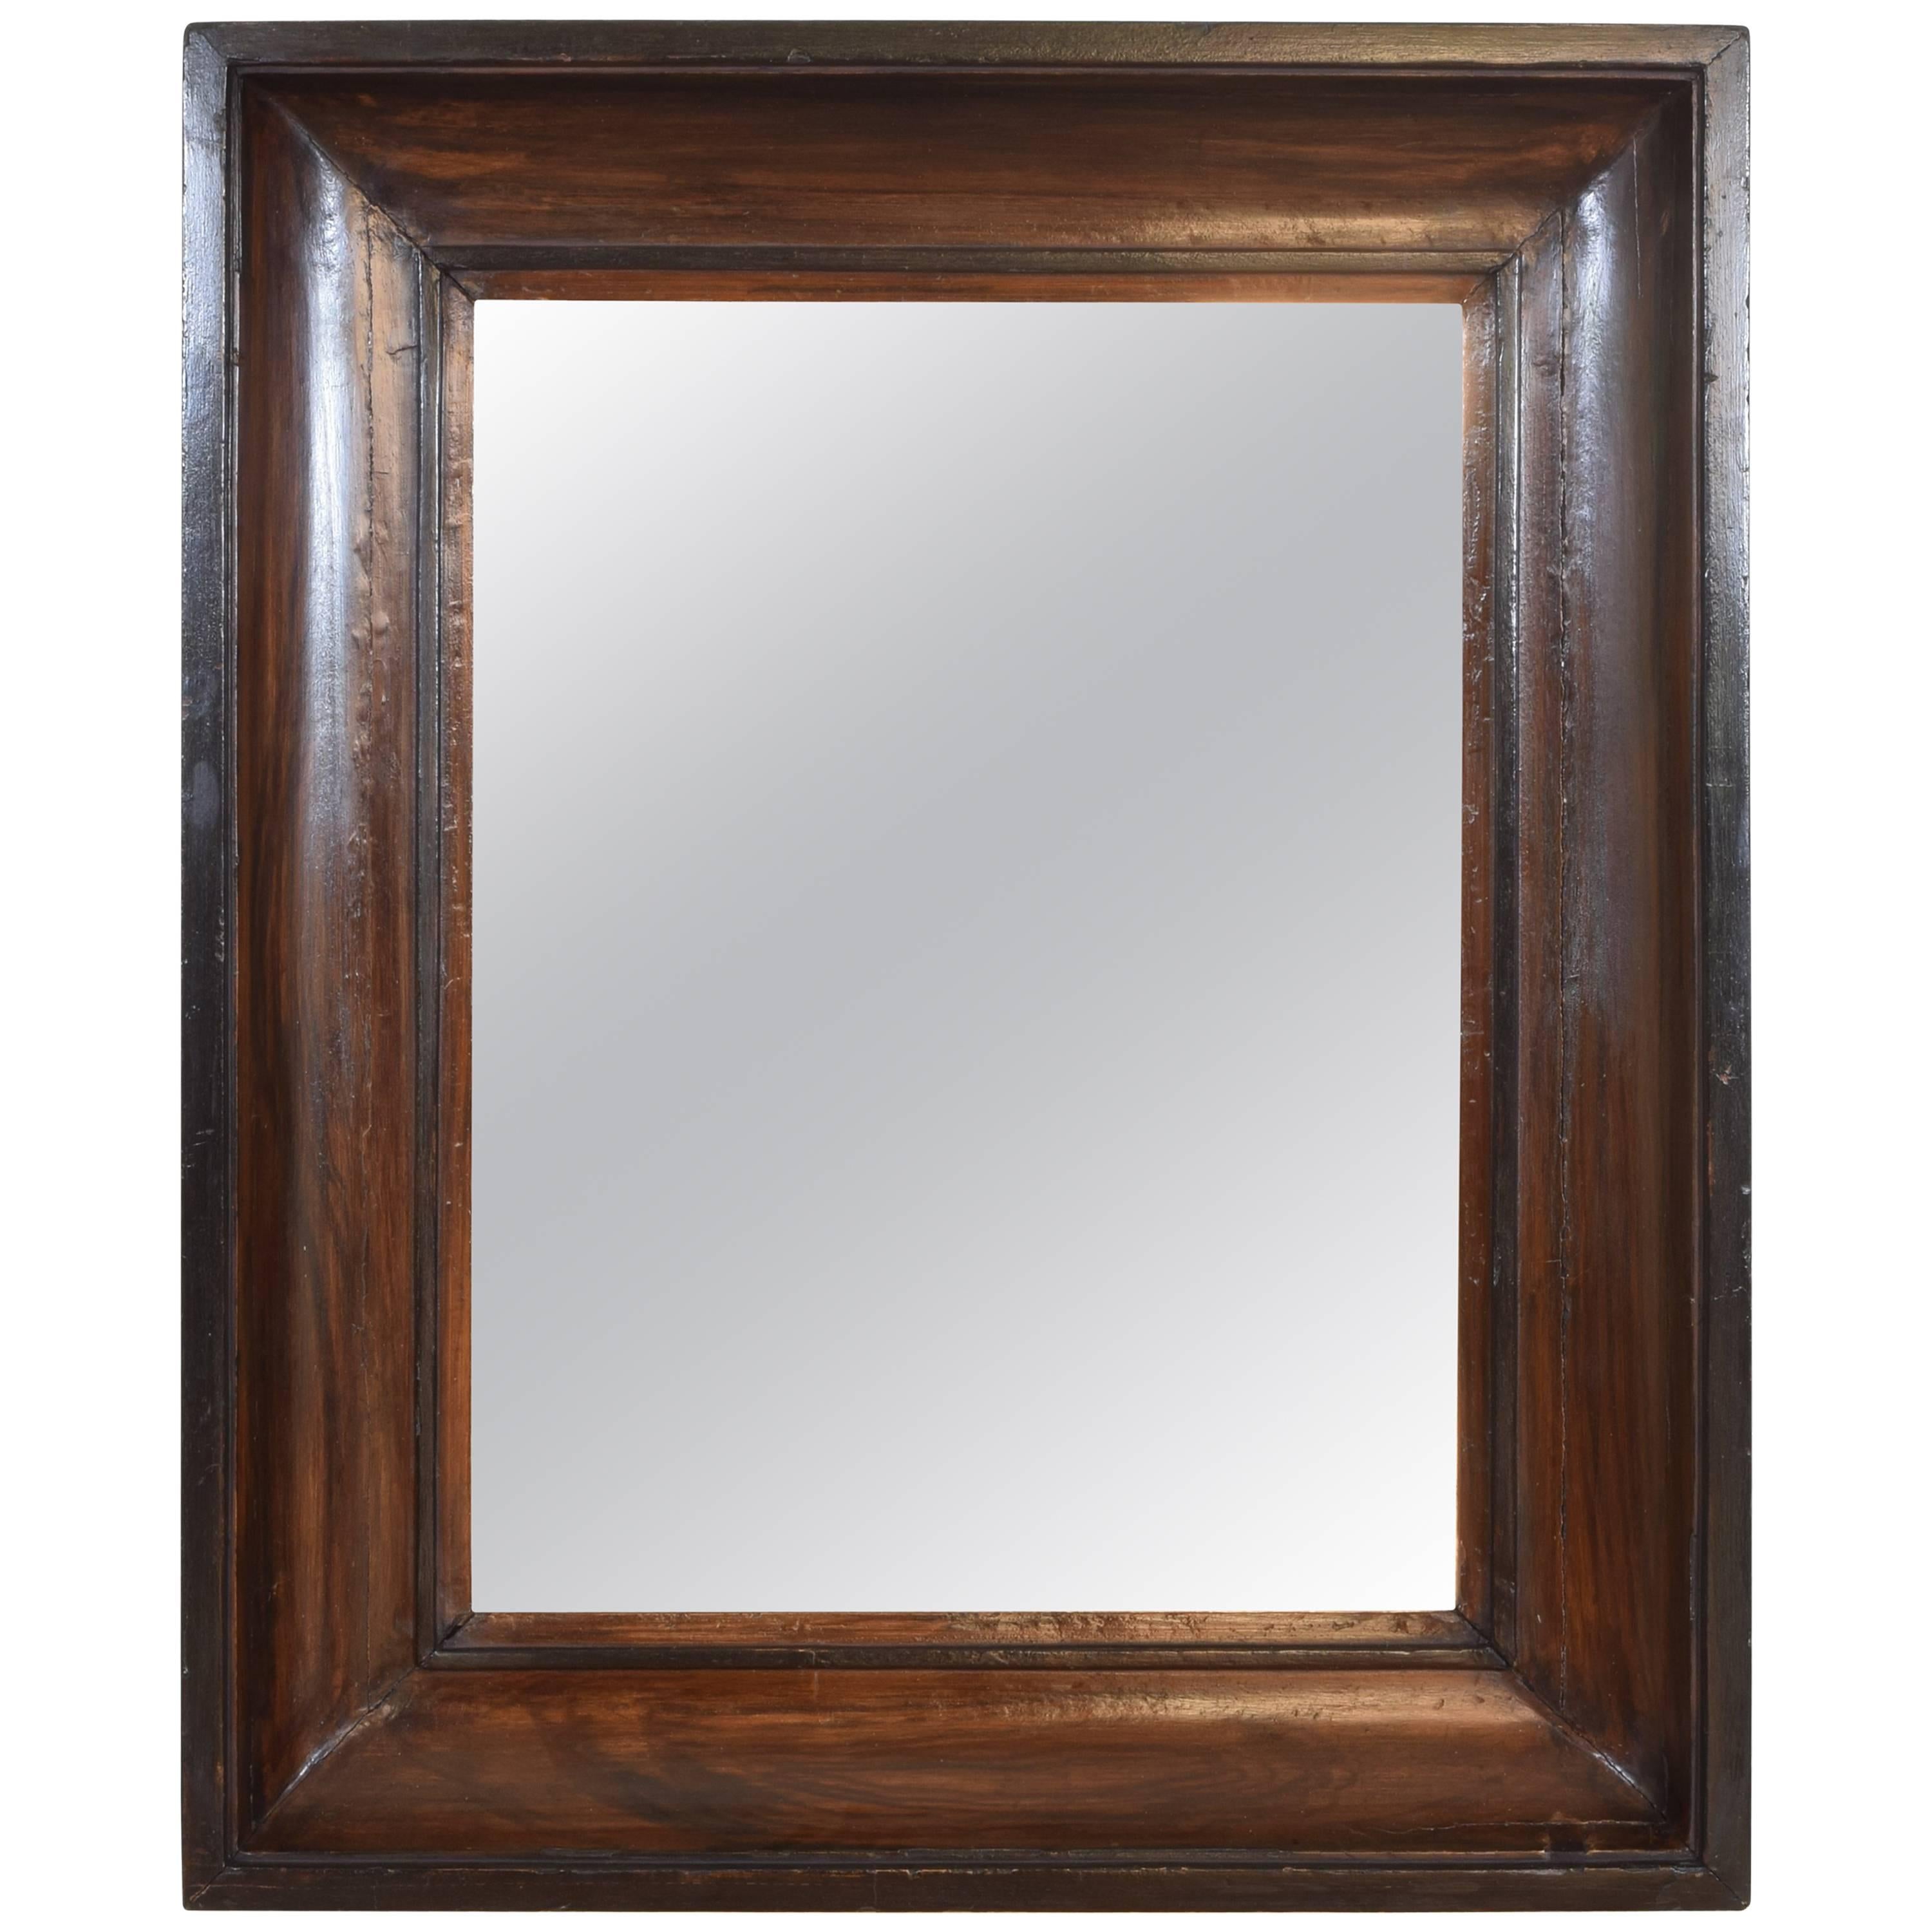 French Faux Grain Painted and Ebonized Wall Mirror, 19th cen.